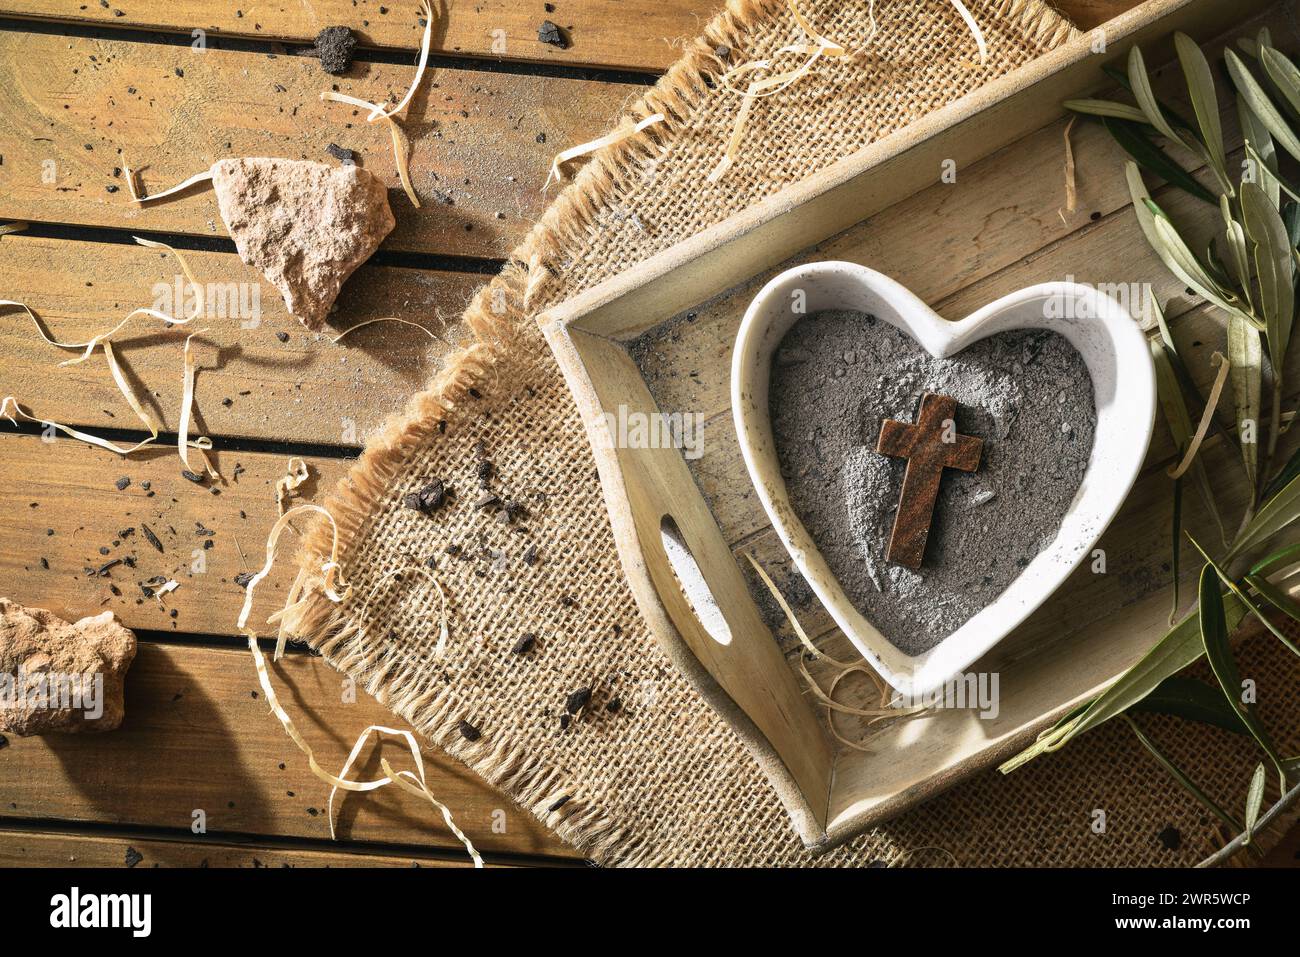 Heart-shaped container with ashes and wooden cross on wooden tray with olive leaves on a table with burlap cloth. Top view. Stock Photo